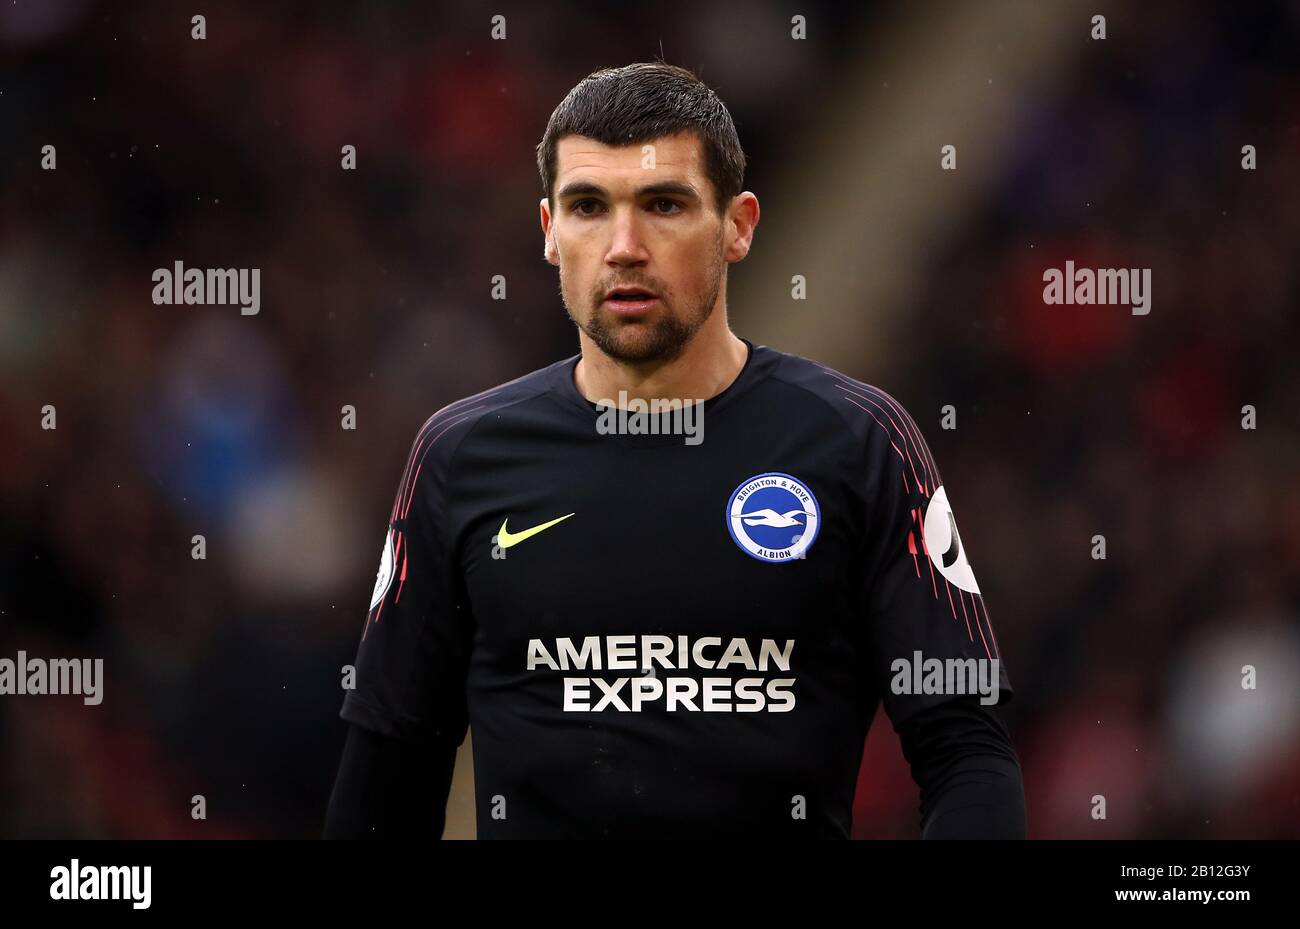 Brighton and Hove Albion goalkeeper Mathew Ryan during the Premier League match at Bramall Lane, Sheffield. Stock Photo